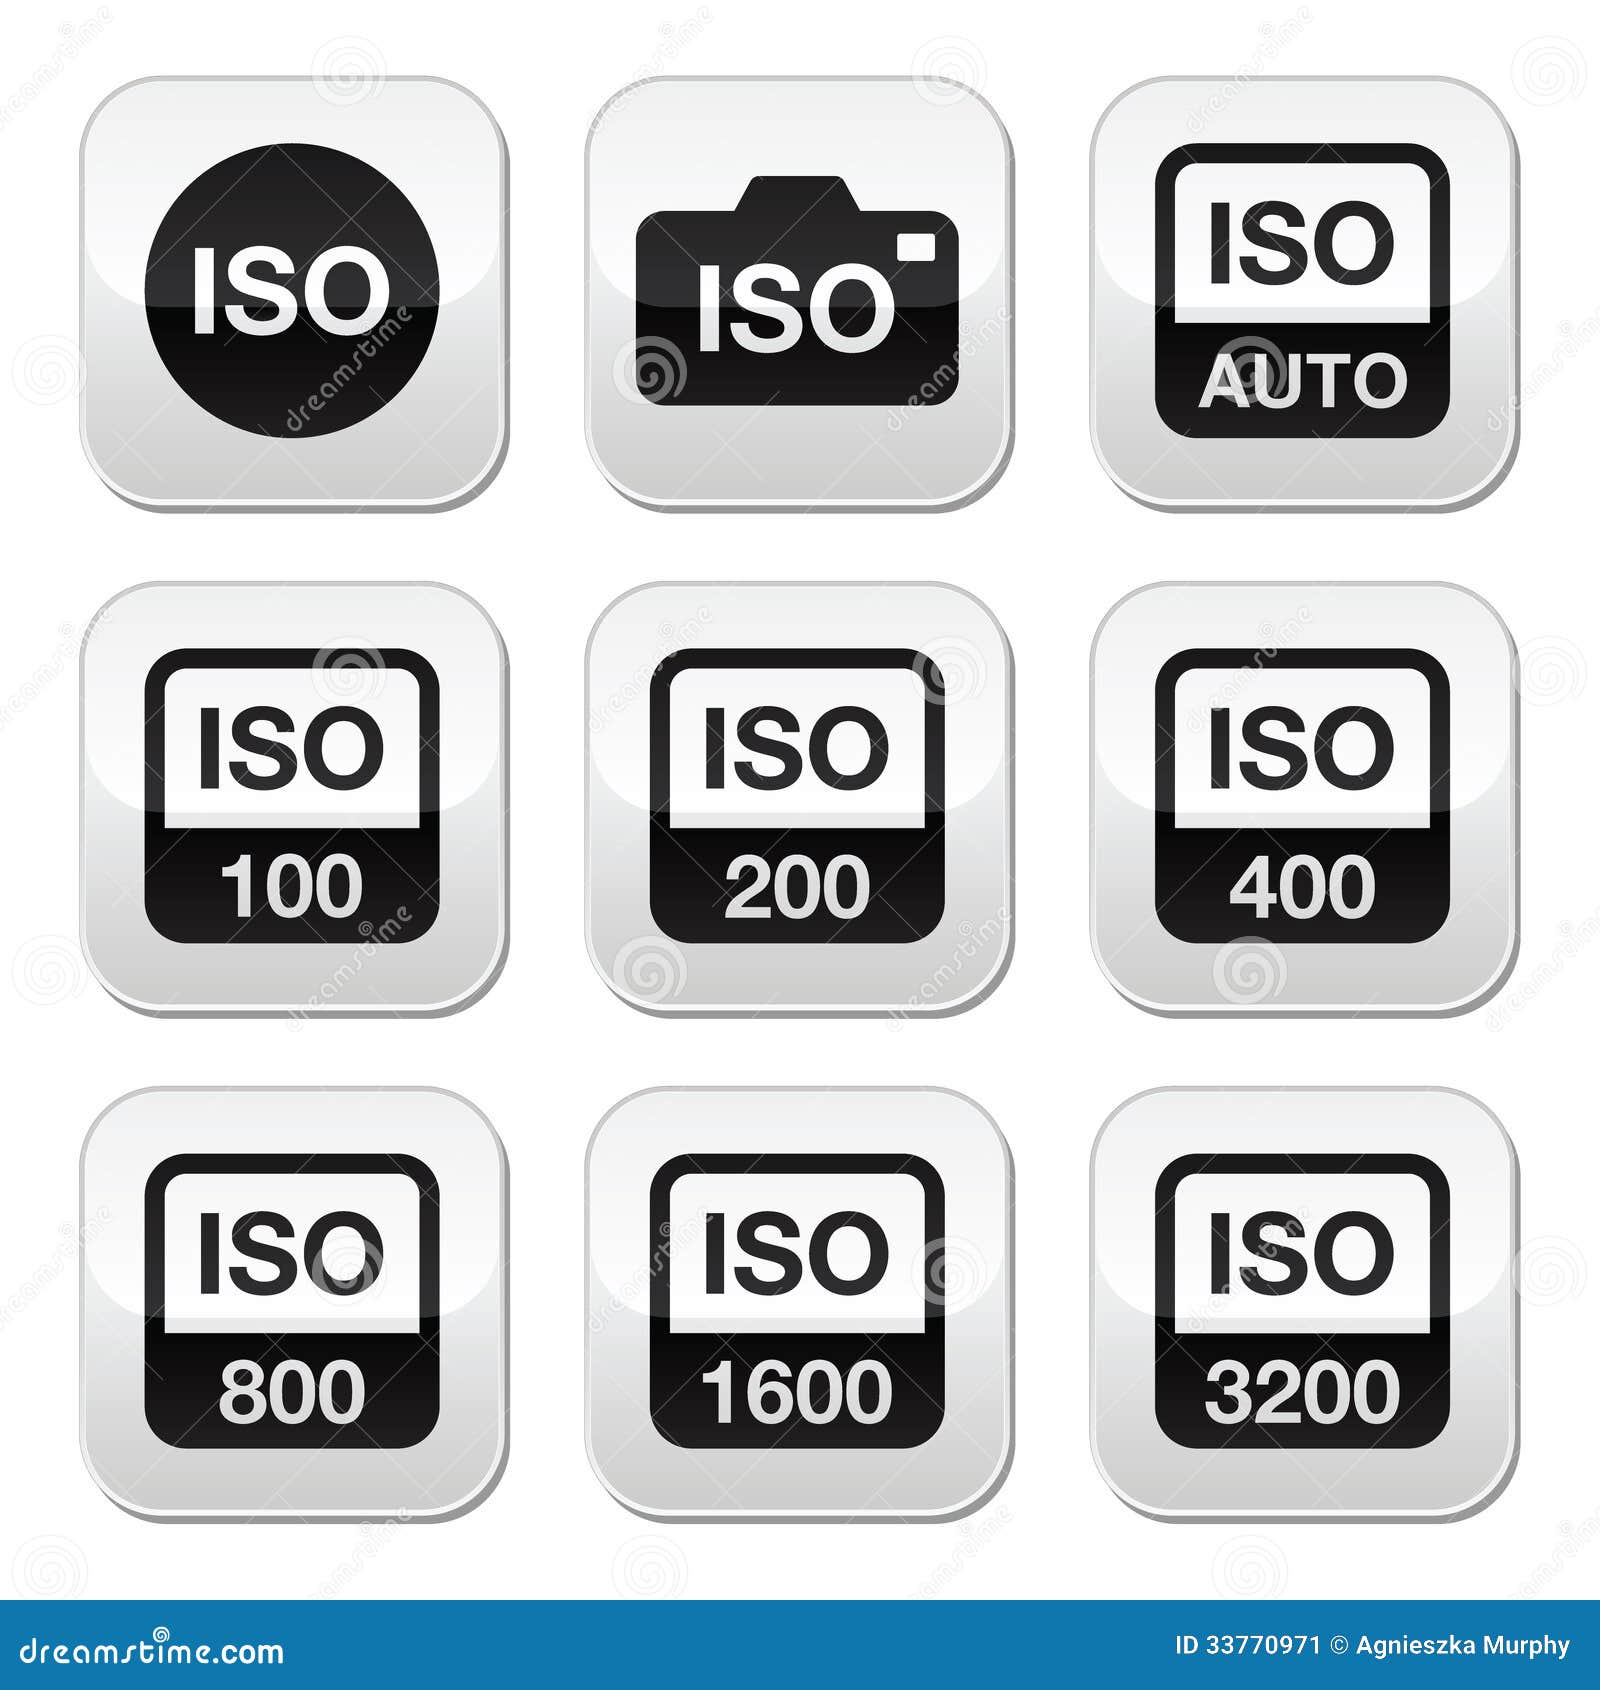 Iso Camera Film Speed Standard Buttons Set Stock Vector Illustration Of Shooting Gallery